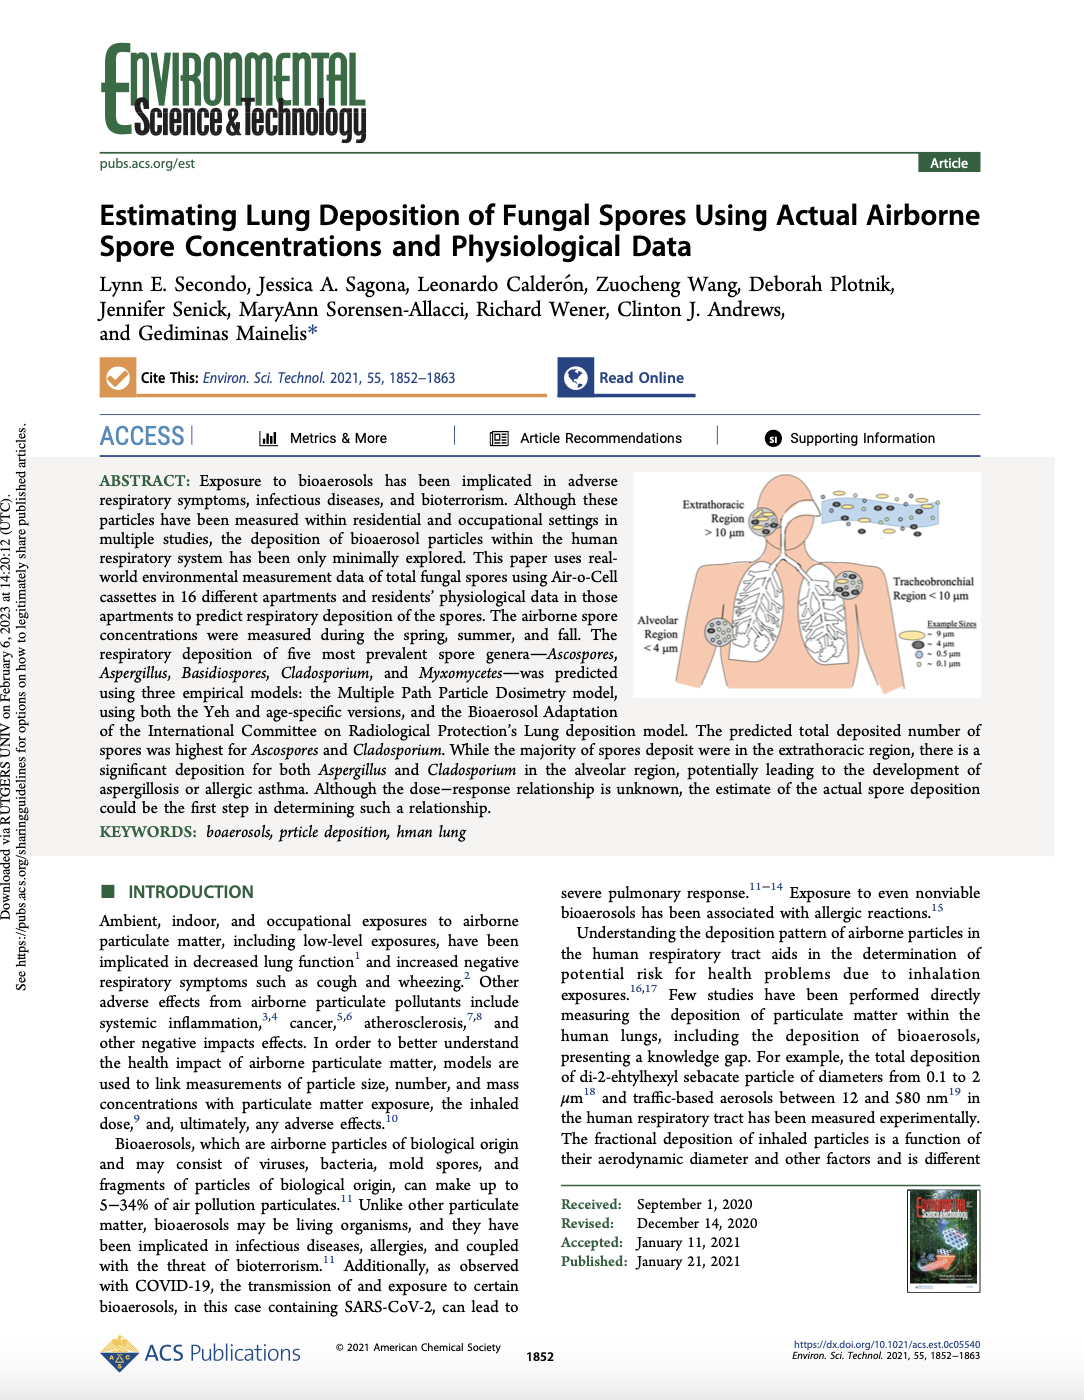 Estimating lung deposition of fungal spores using actual airborne spore concentrations and physiological data